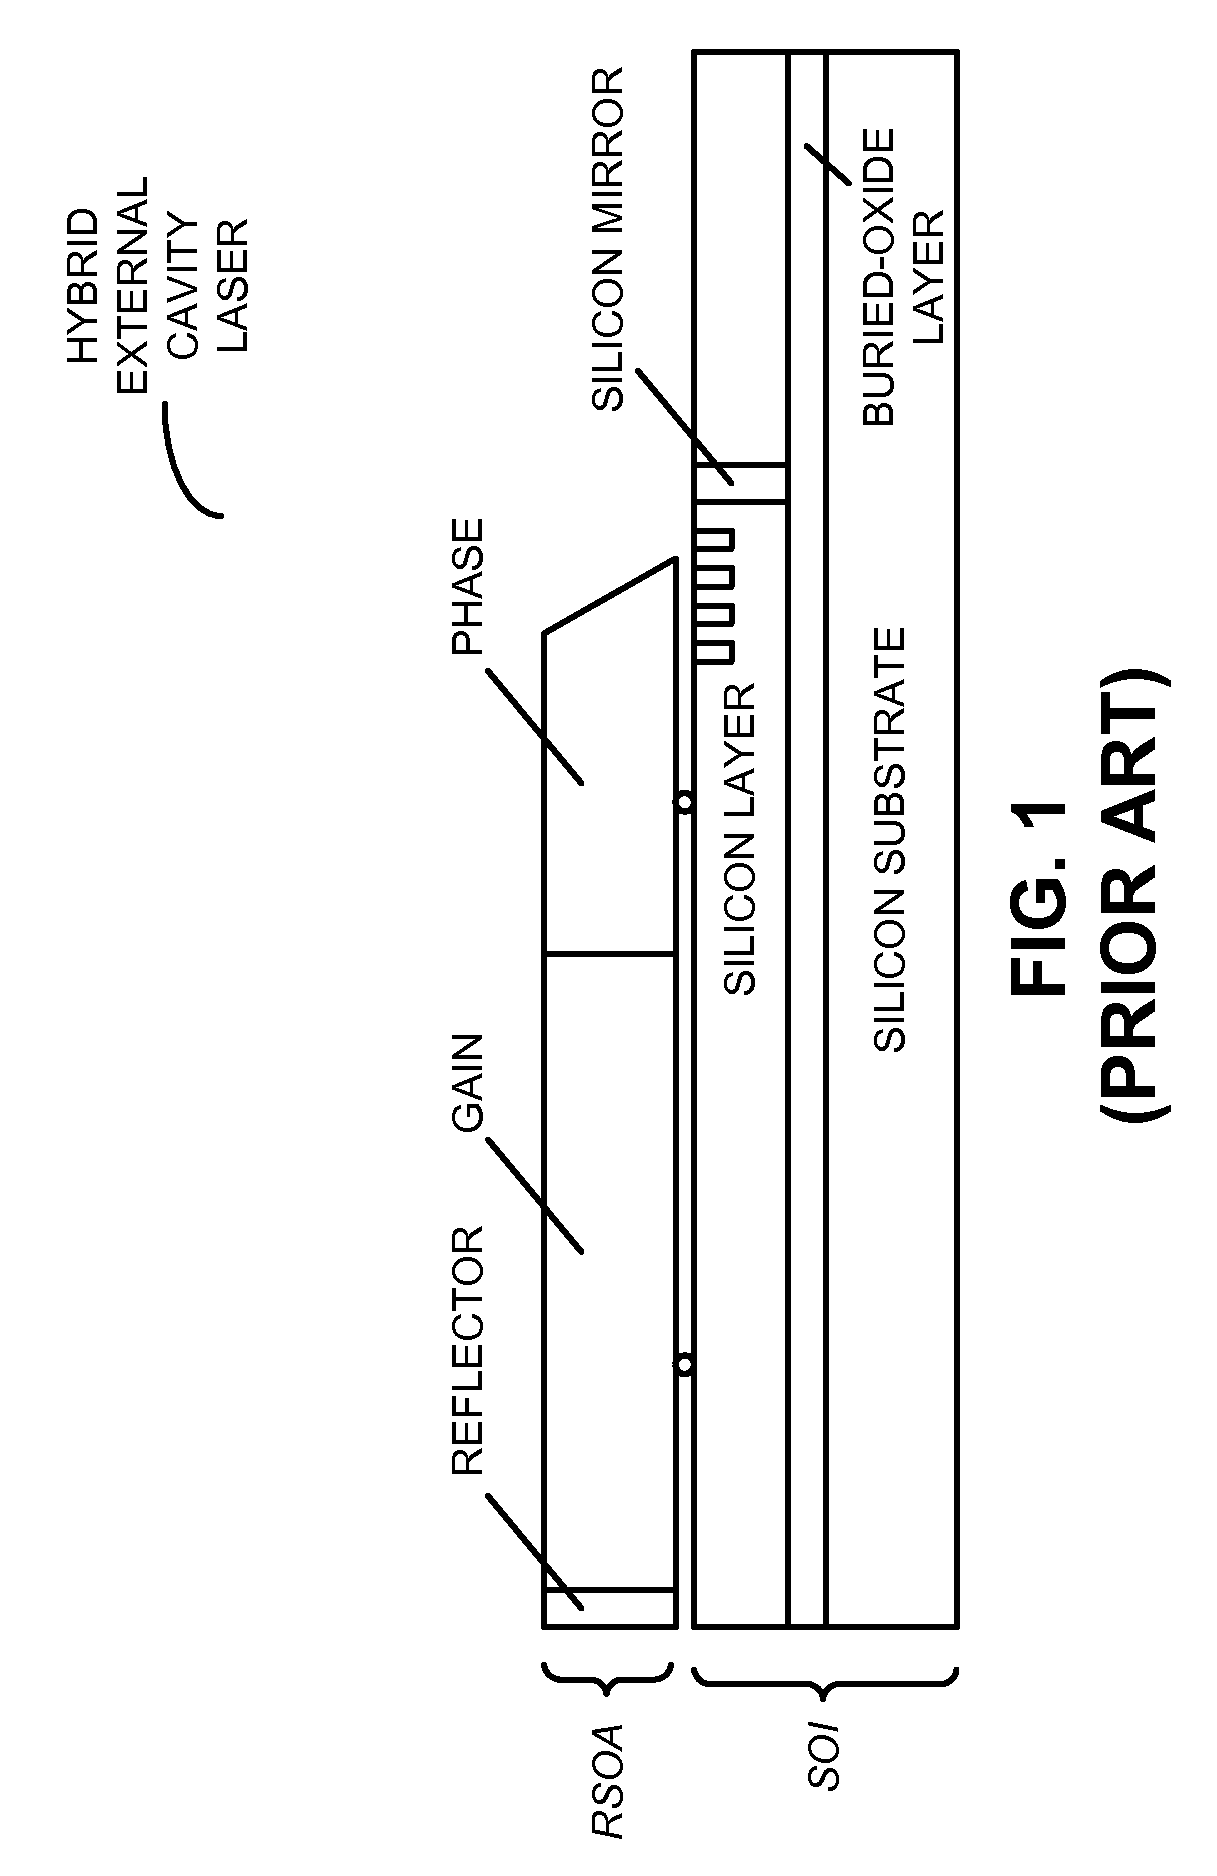 External cavity laser with reduced optical mode-hopping